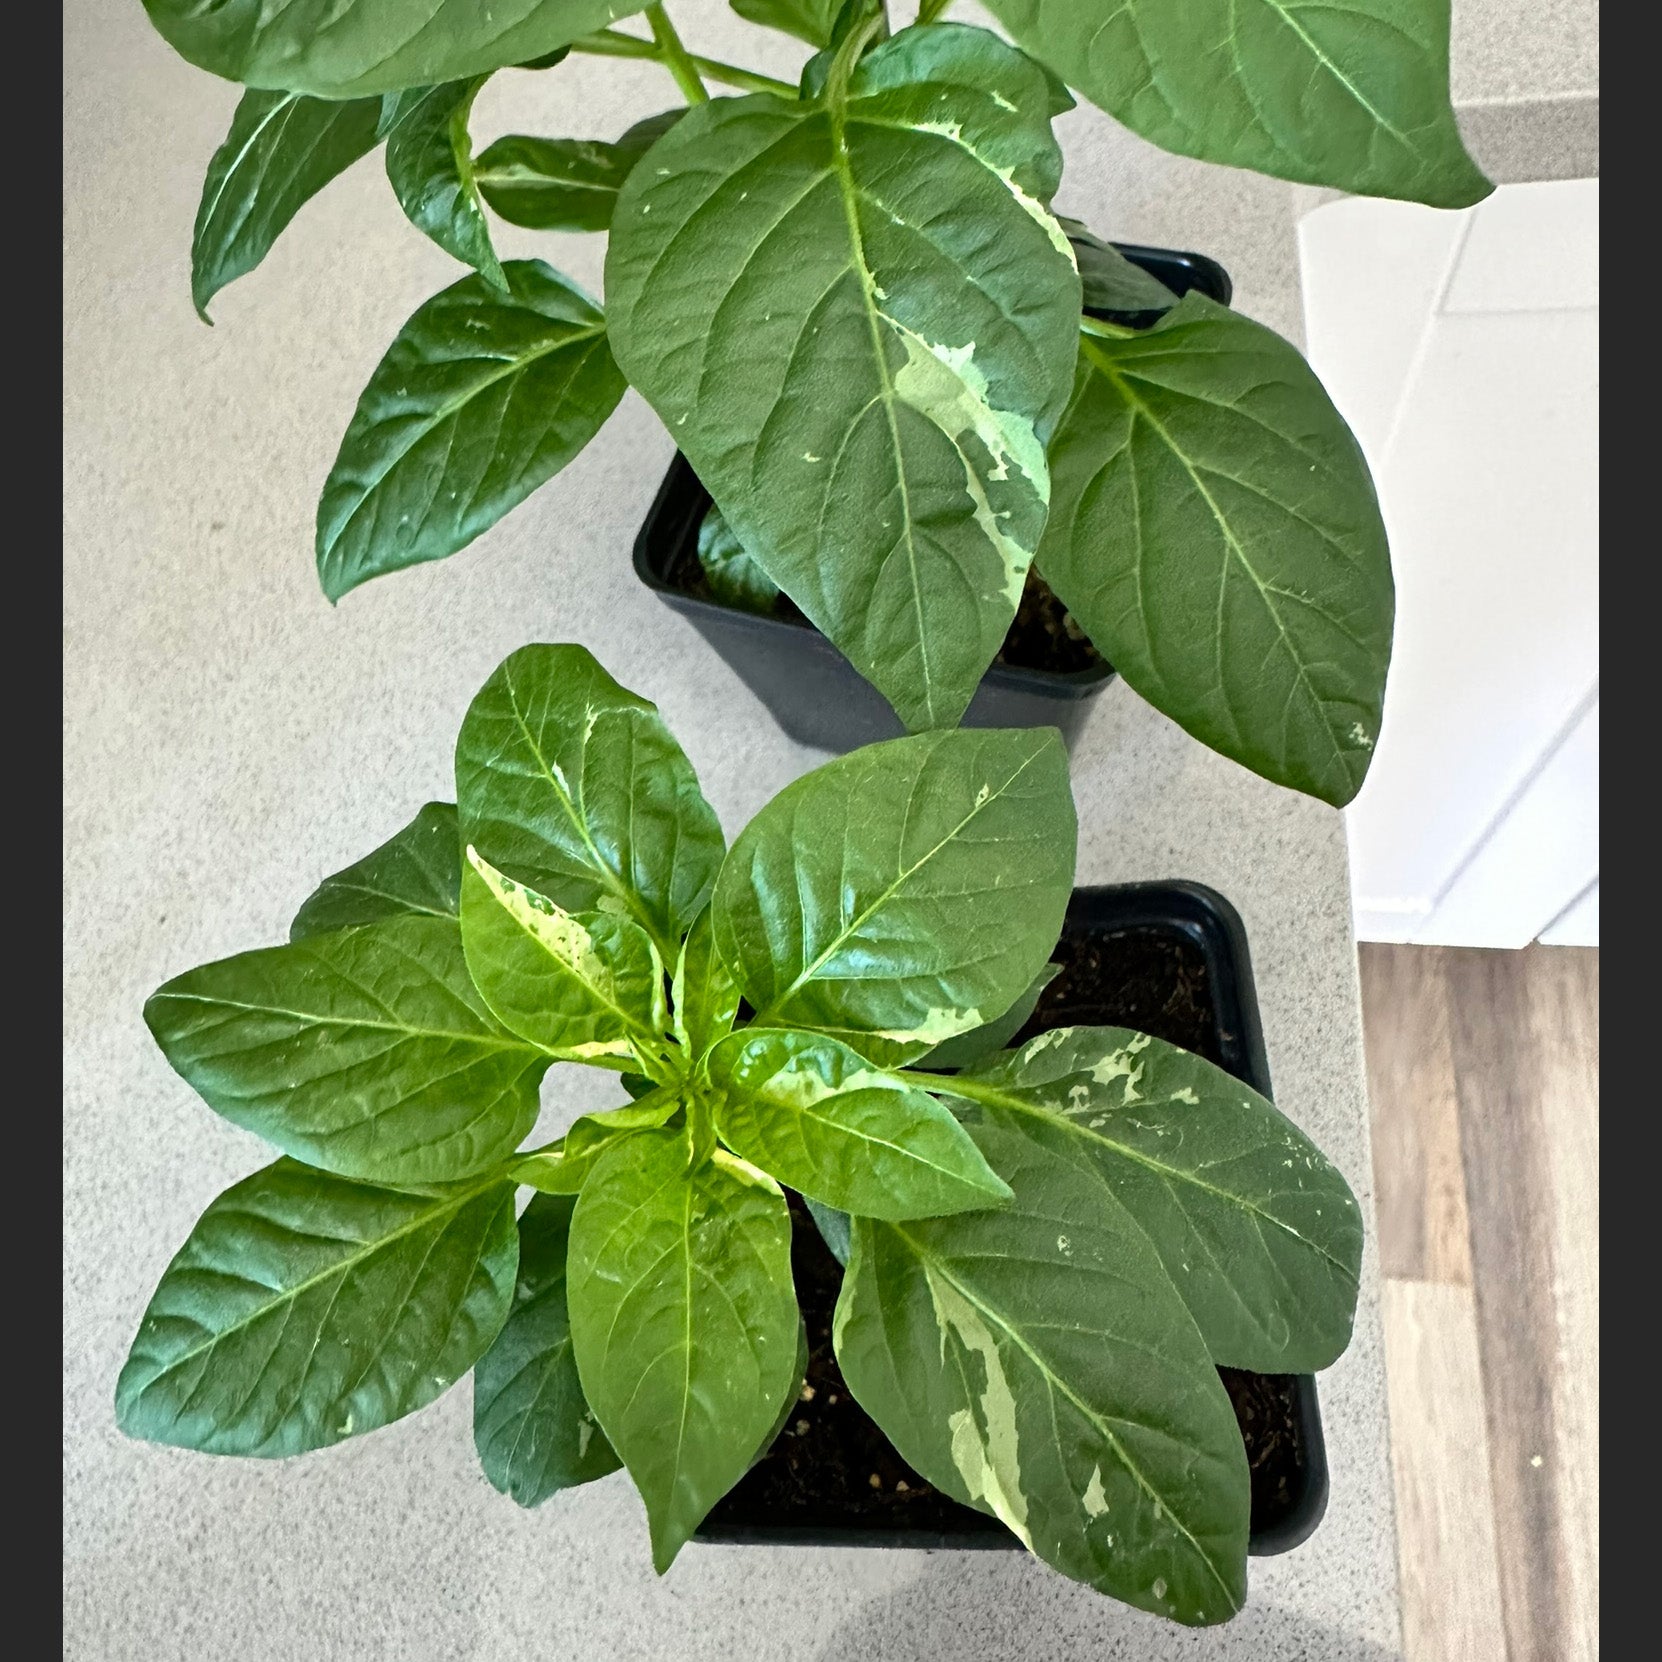 Growing Peppers from Seed